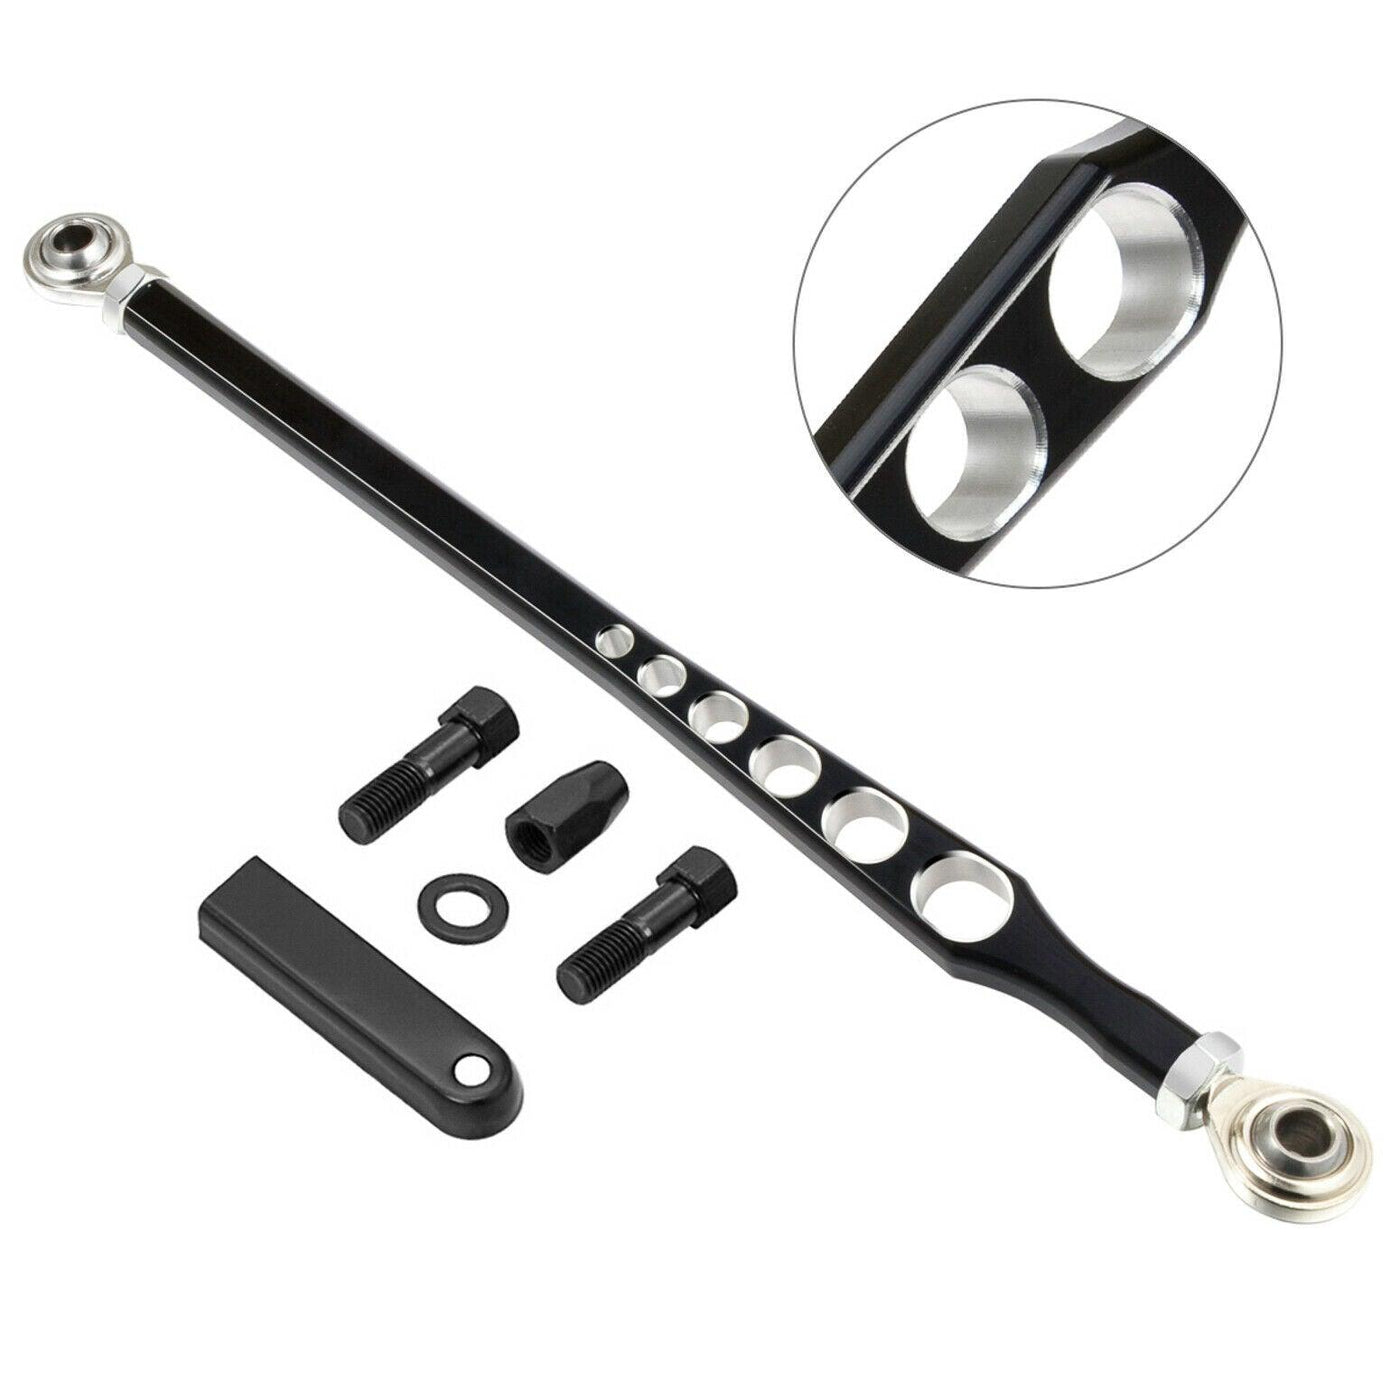 Black Gear Shift Linkage Fit For Harley Touring Road Street Electra Glide 80-21 - Moto Life Products